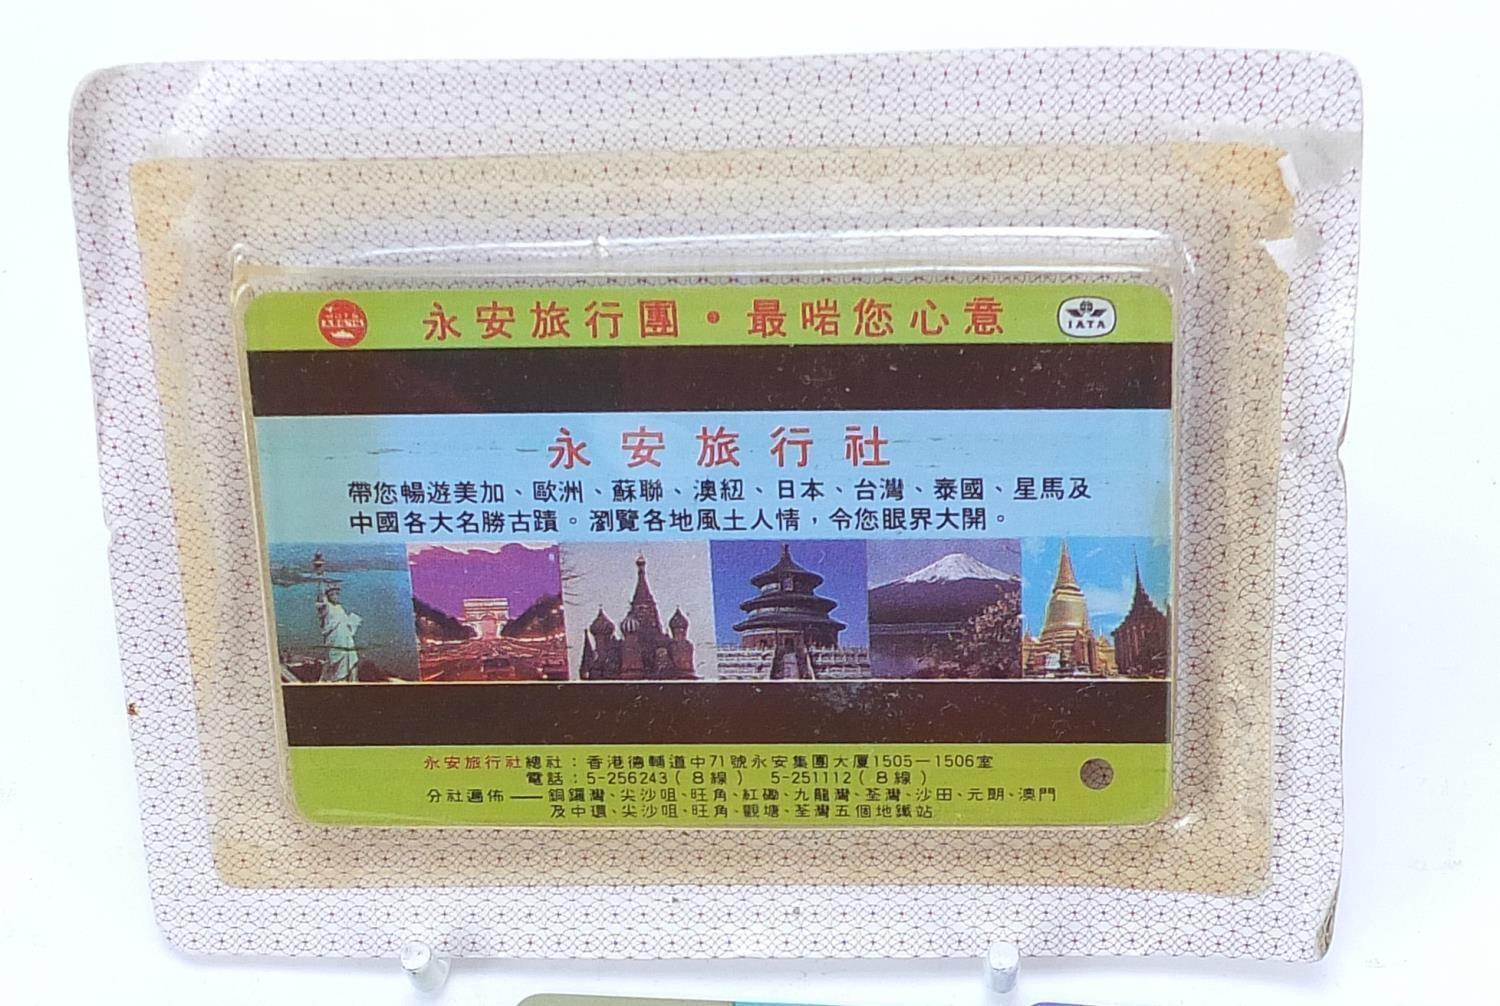 Selection of Chinese railway tickets - Image 2 of 3